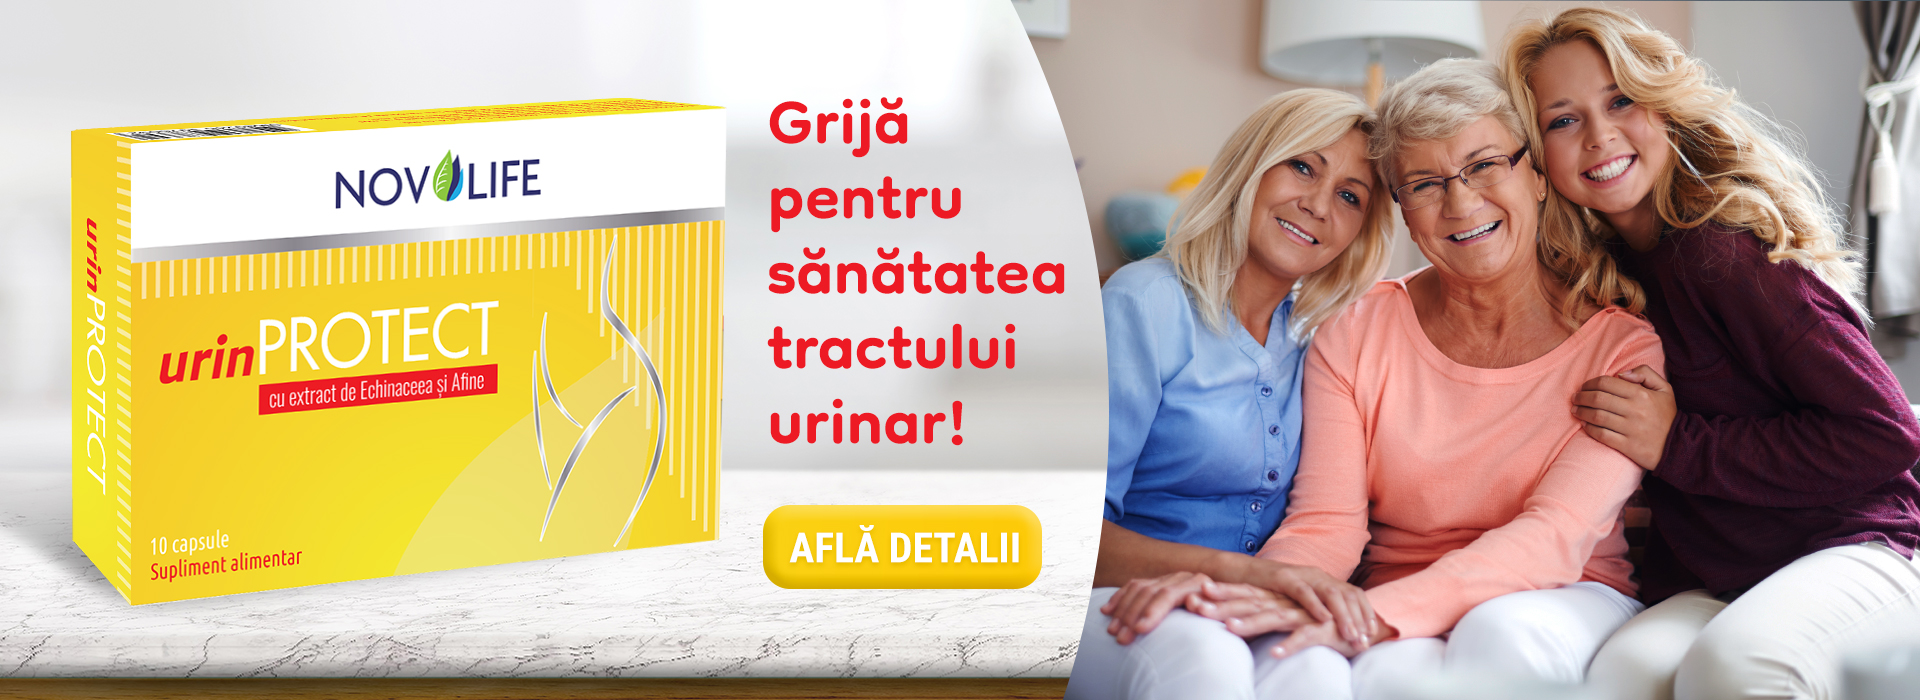 urinPROTECT